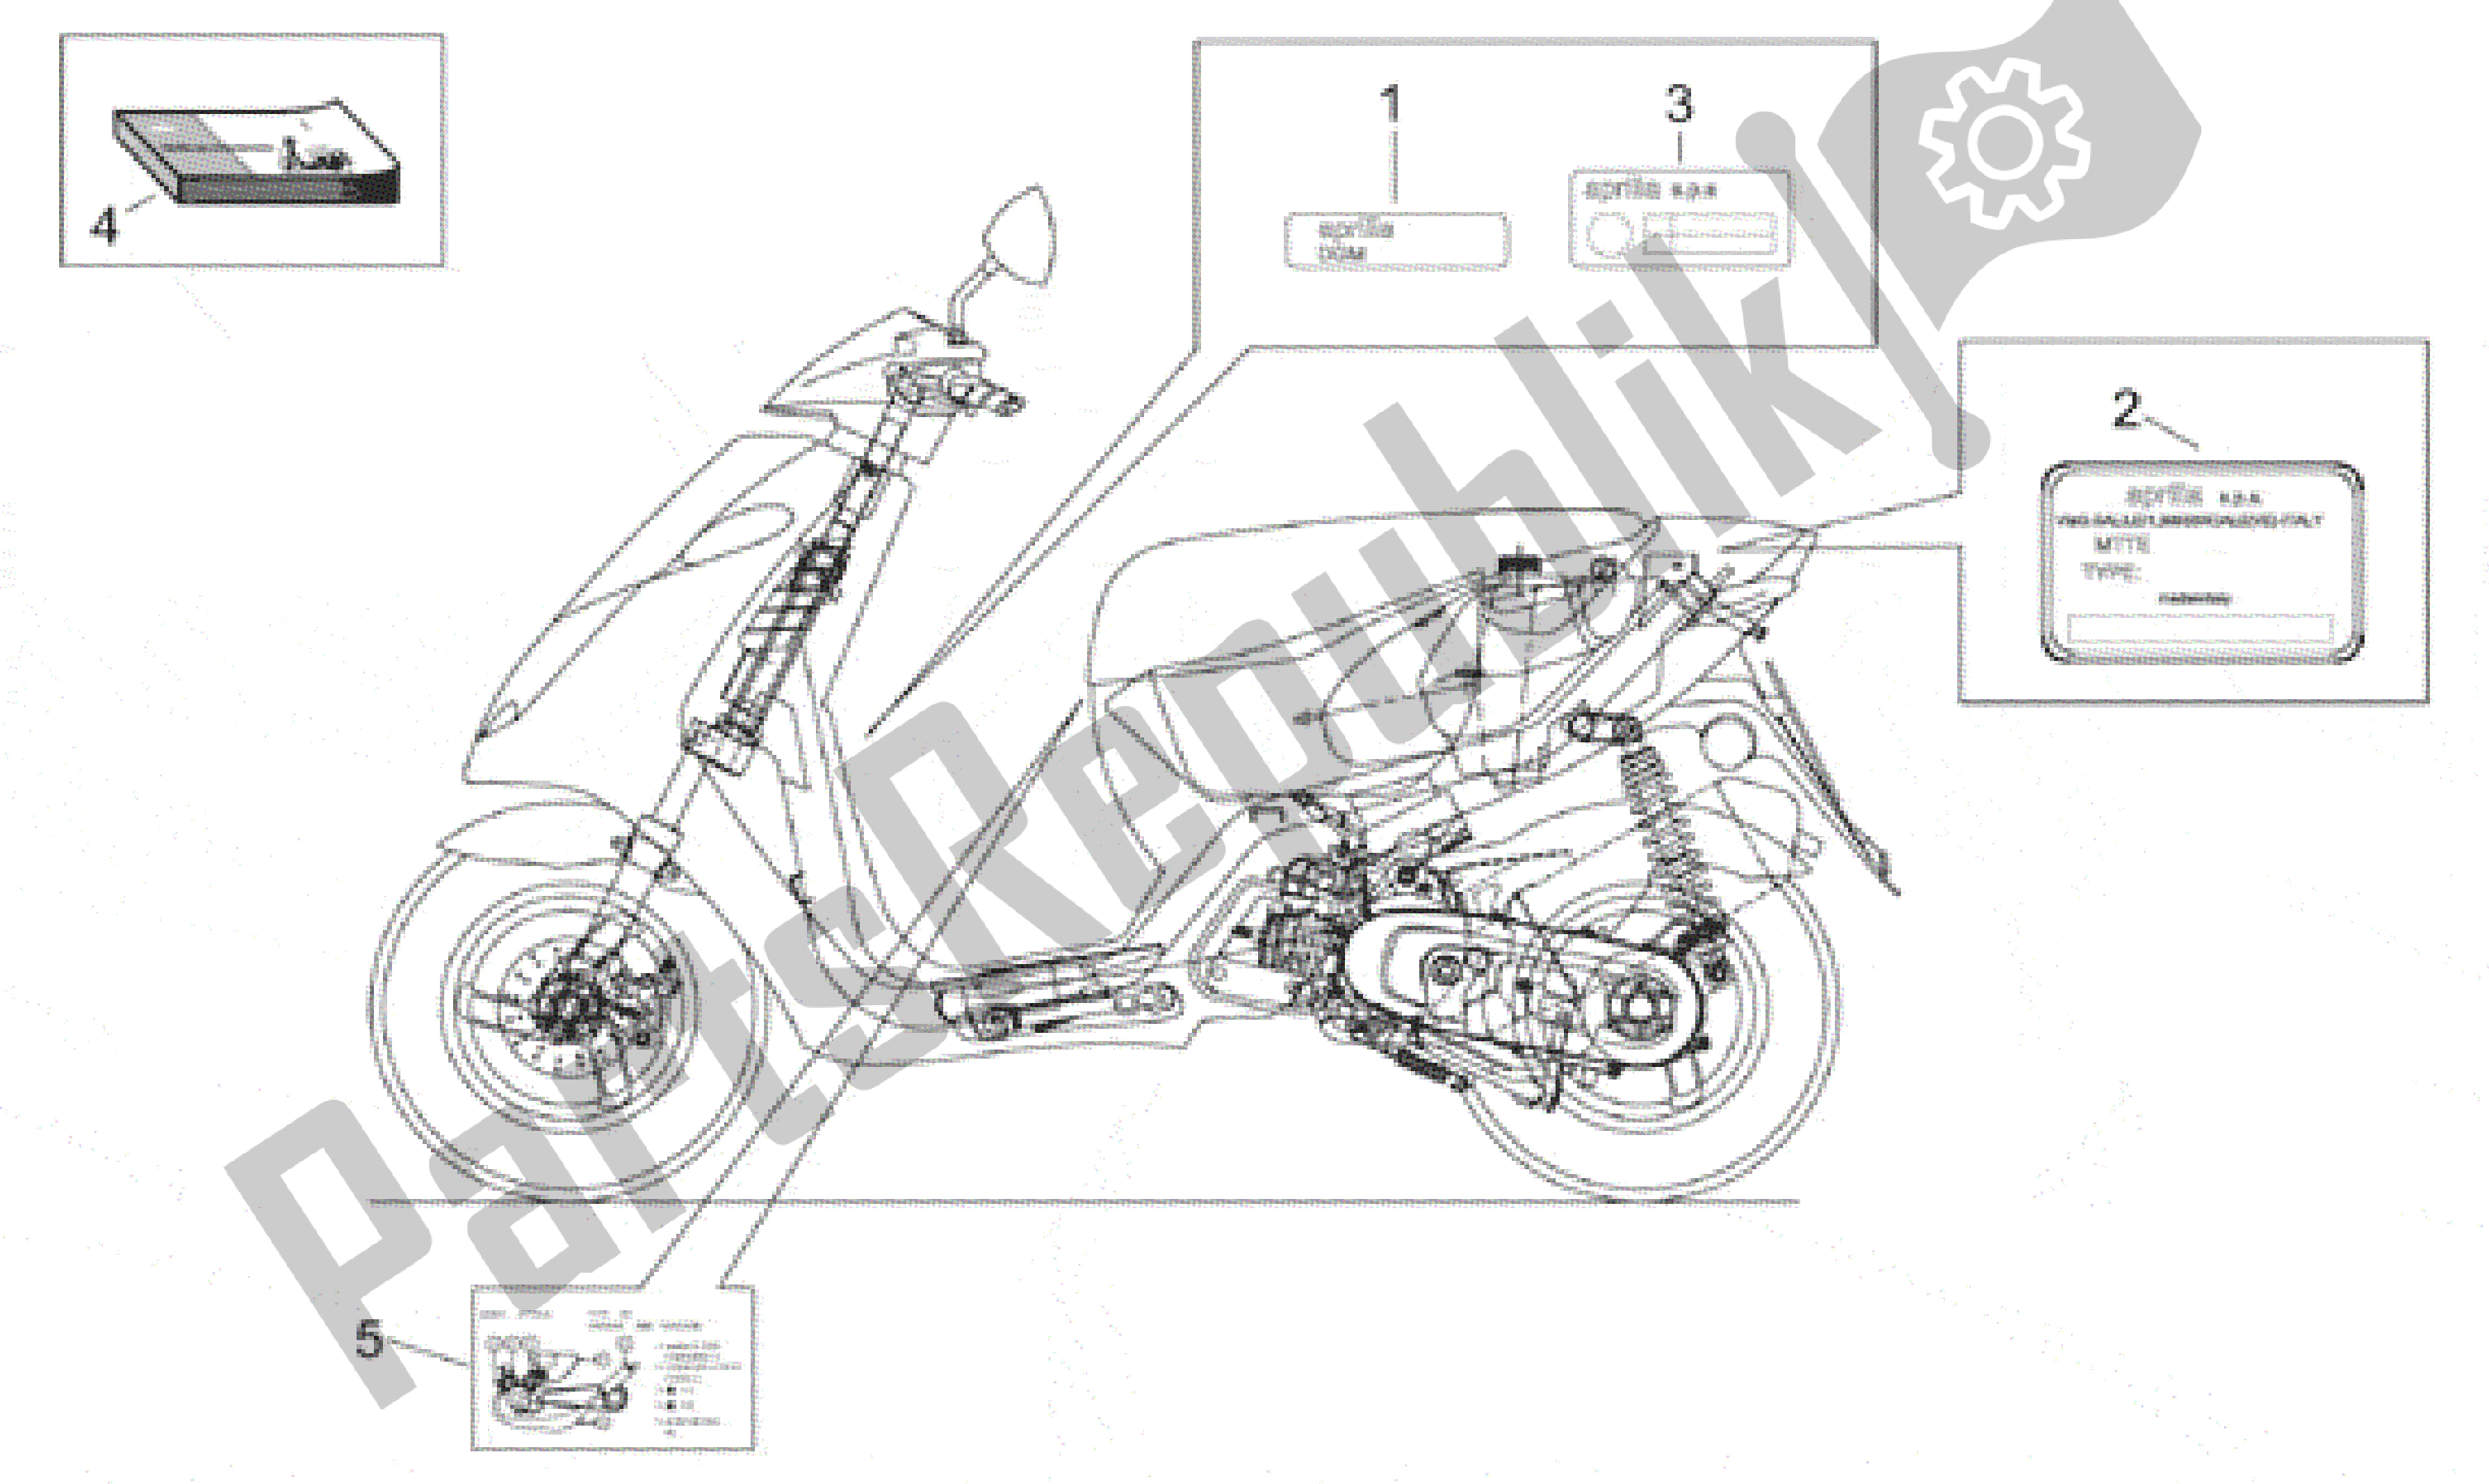 All parts for the Plate Set And Handbook of the Aprilia Sonic 50 1998 - 2001